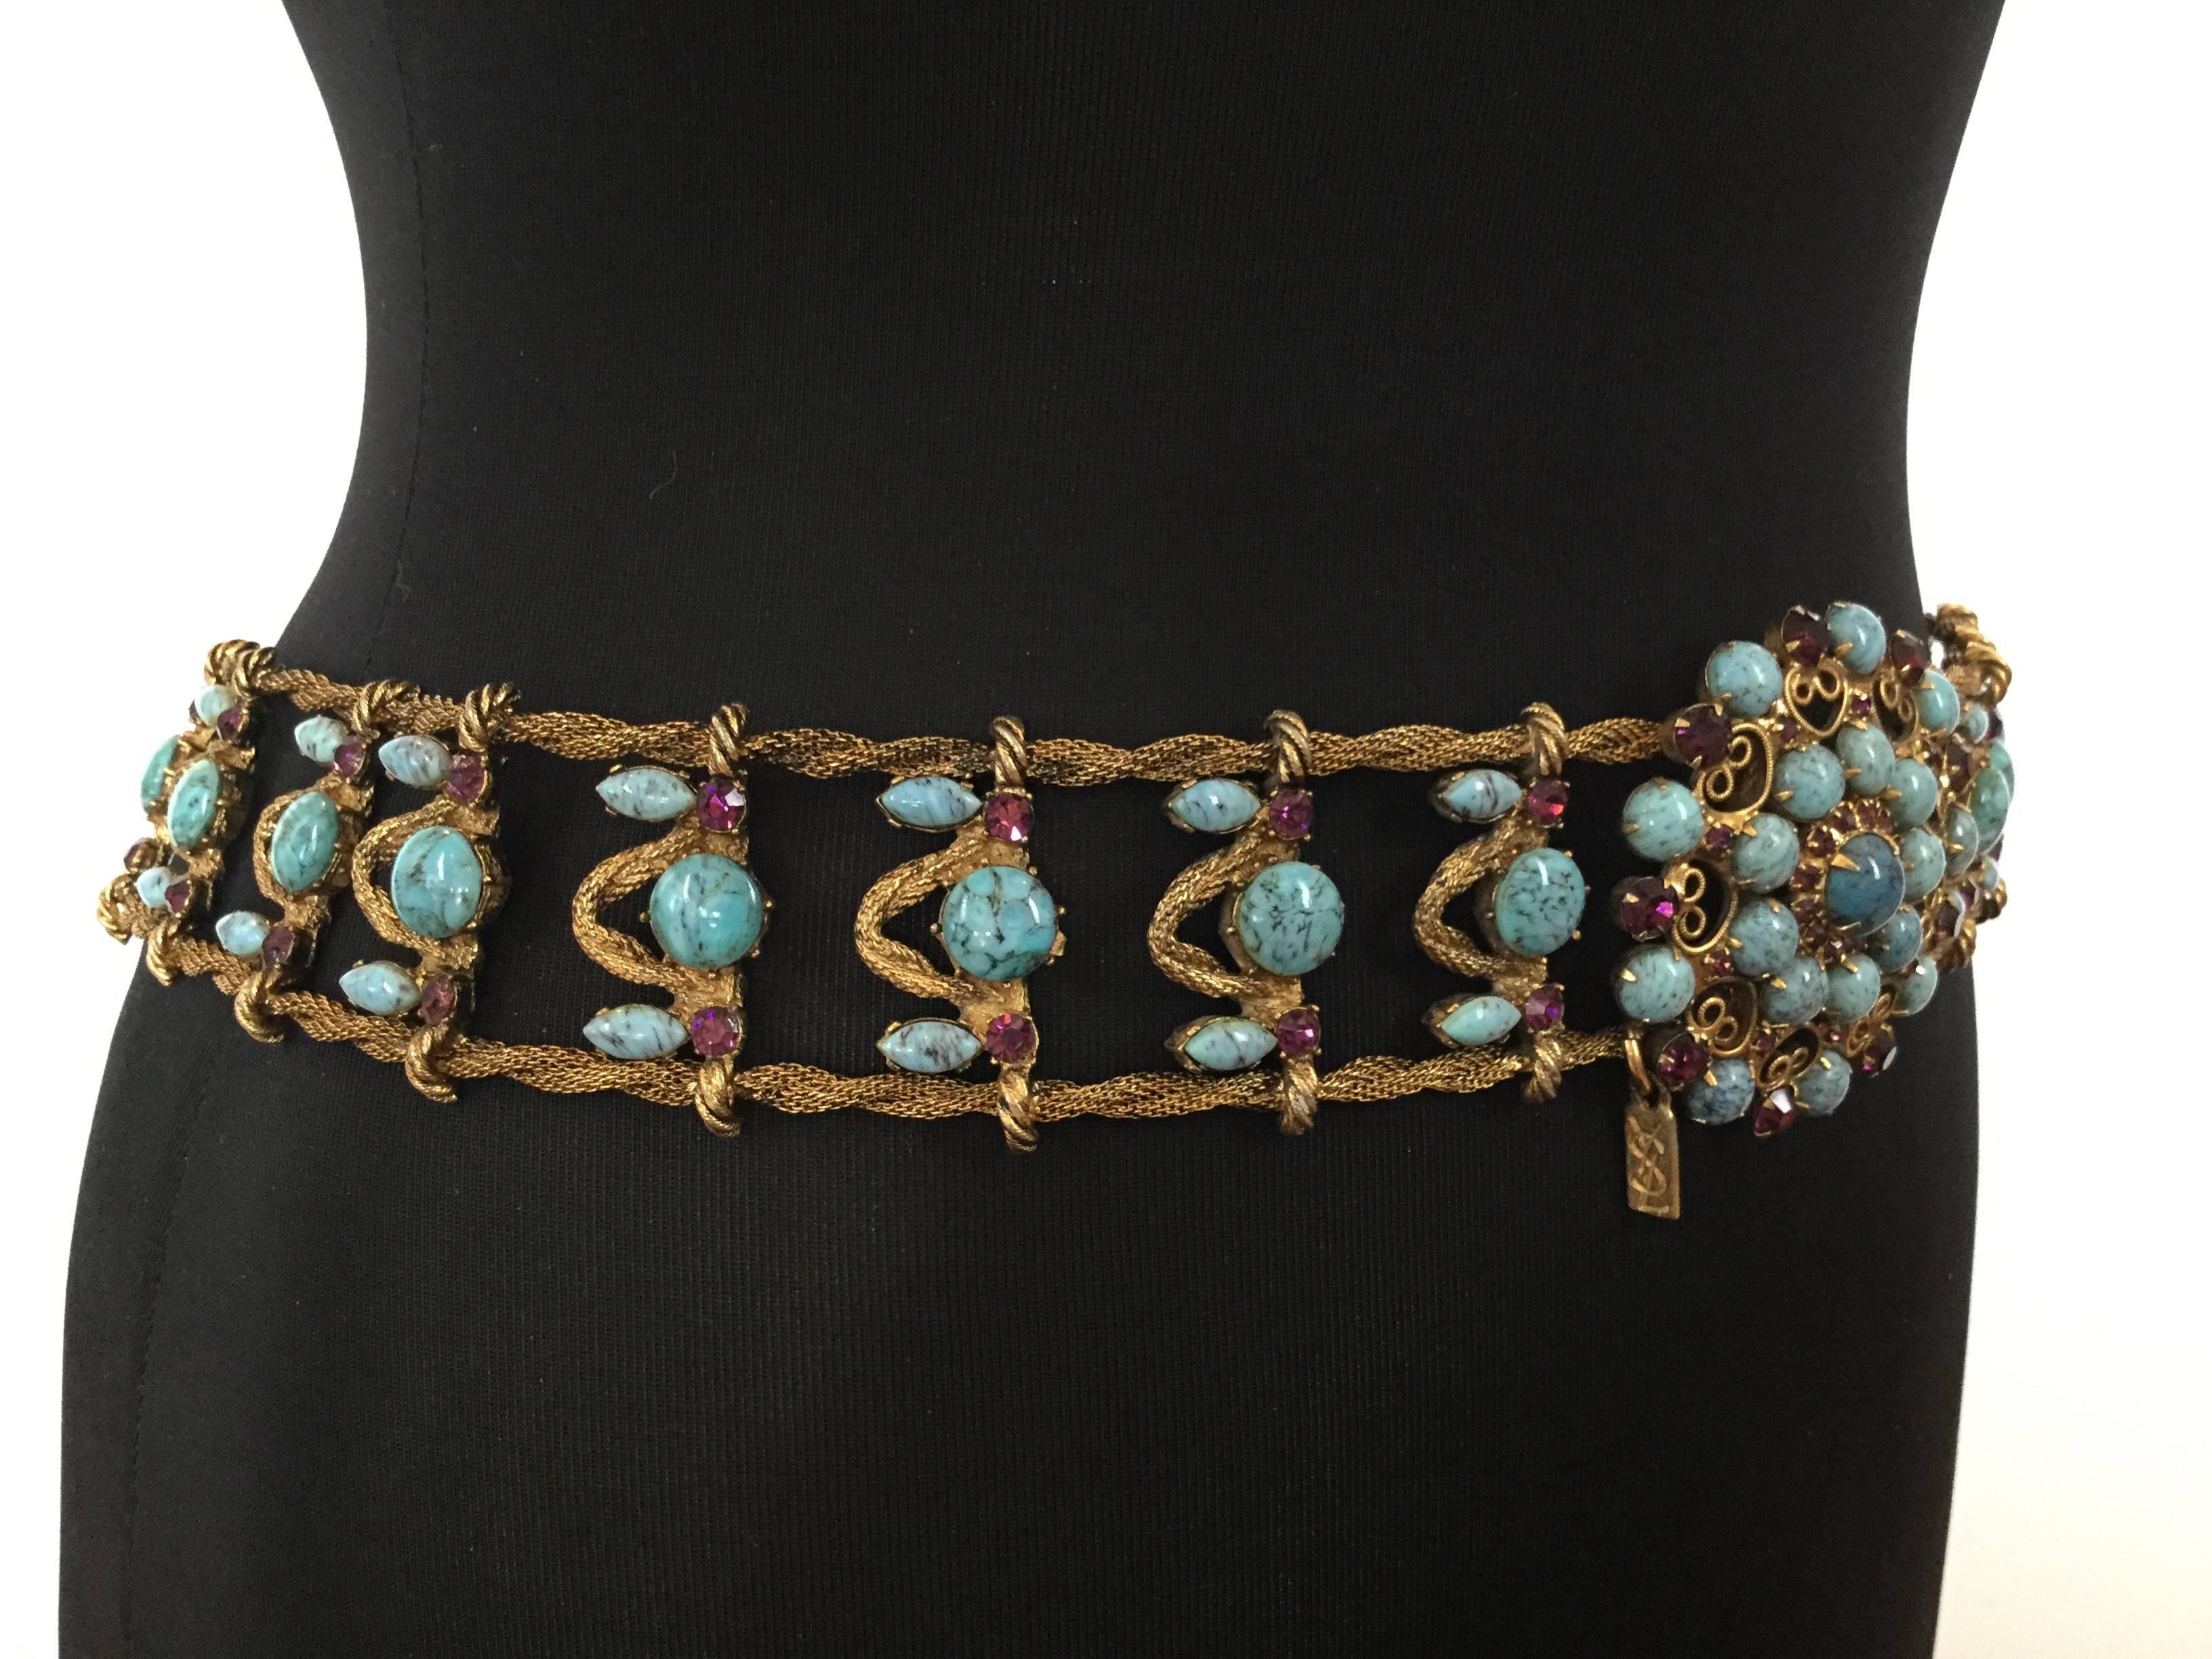 Women's or Men's Incredible Yves Saint Laurent Metal Belt with Faux Turquoise Cabochons. 1970's.